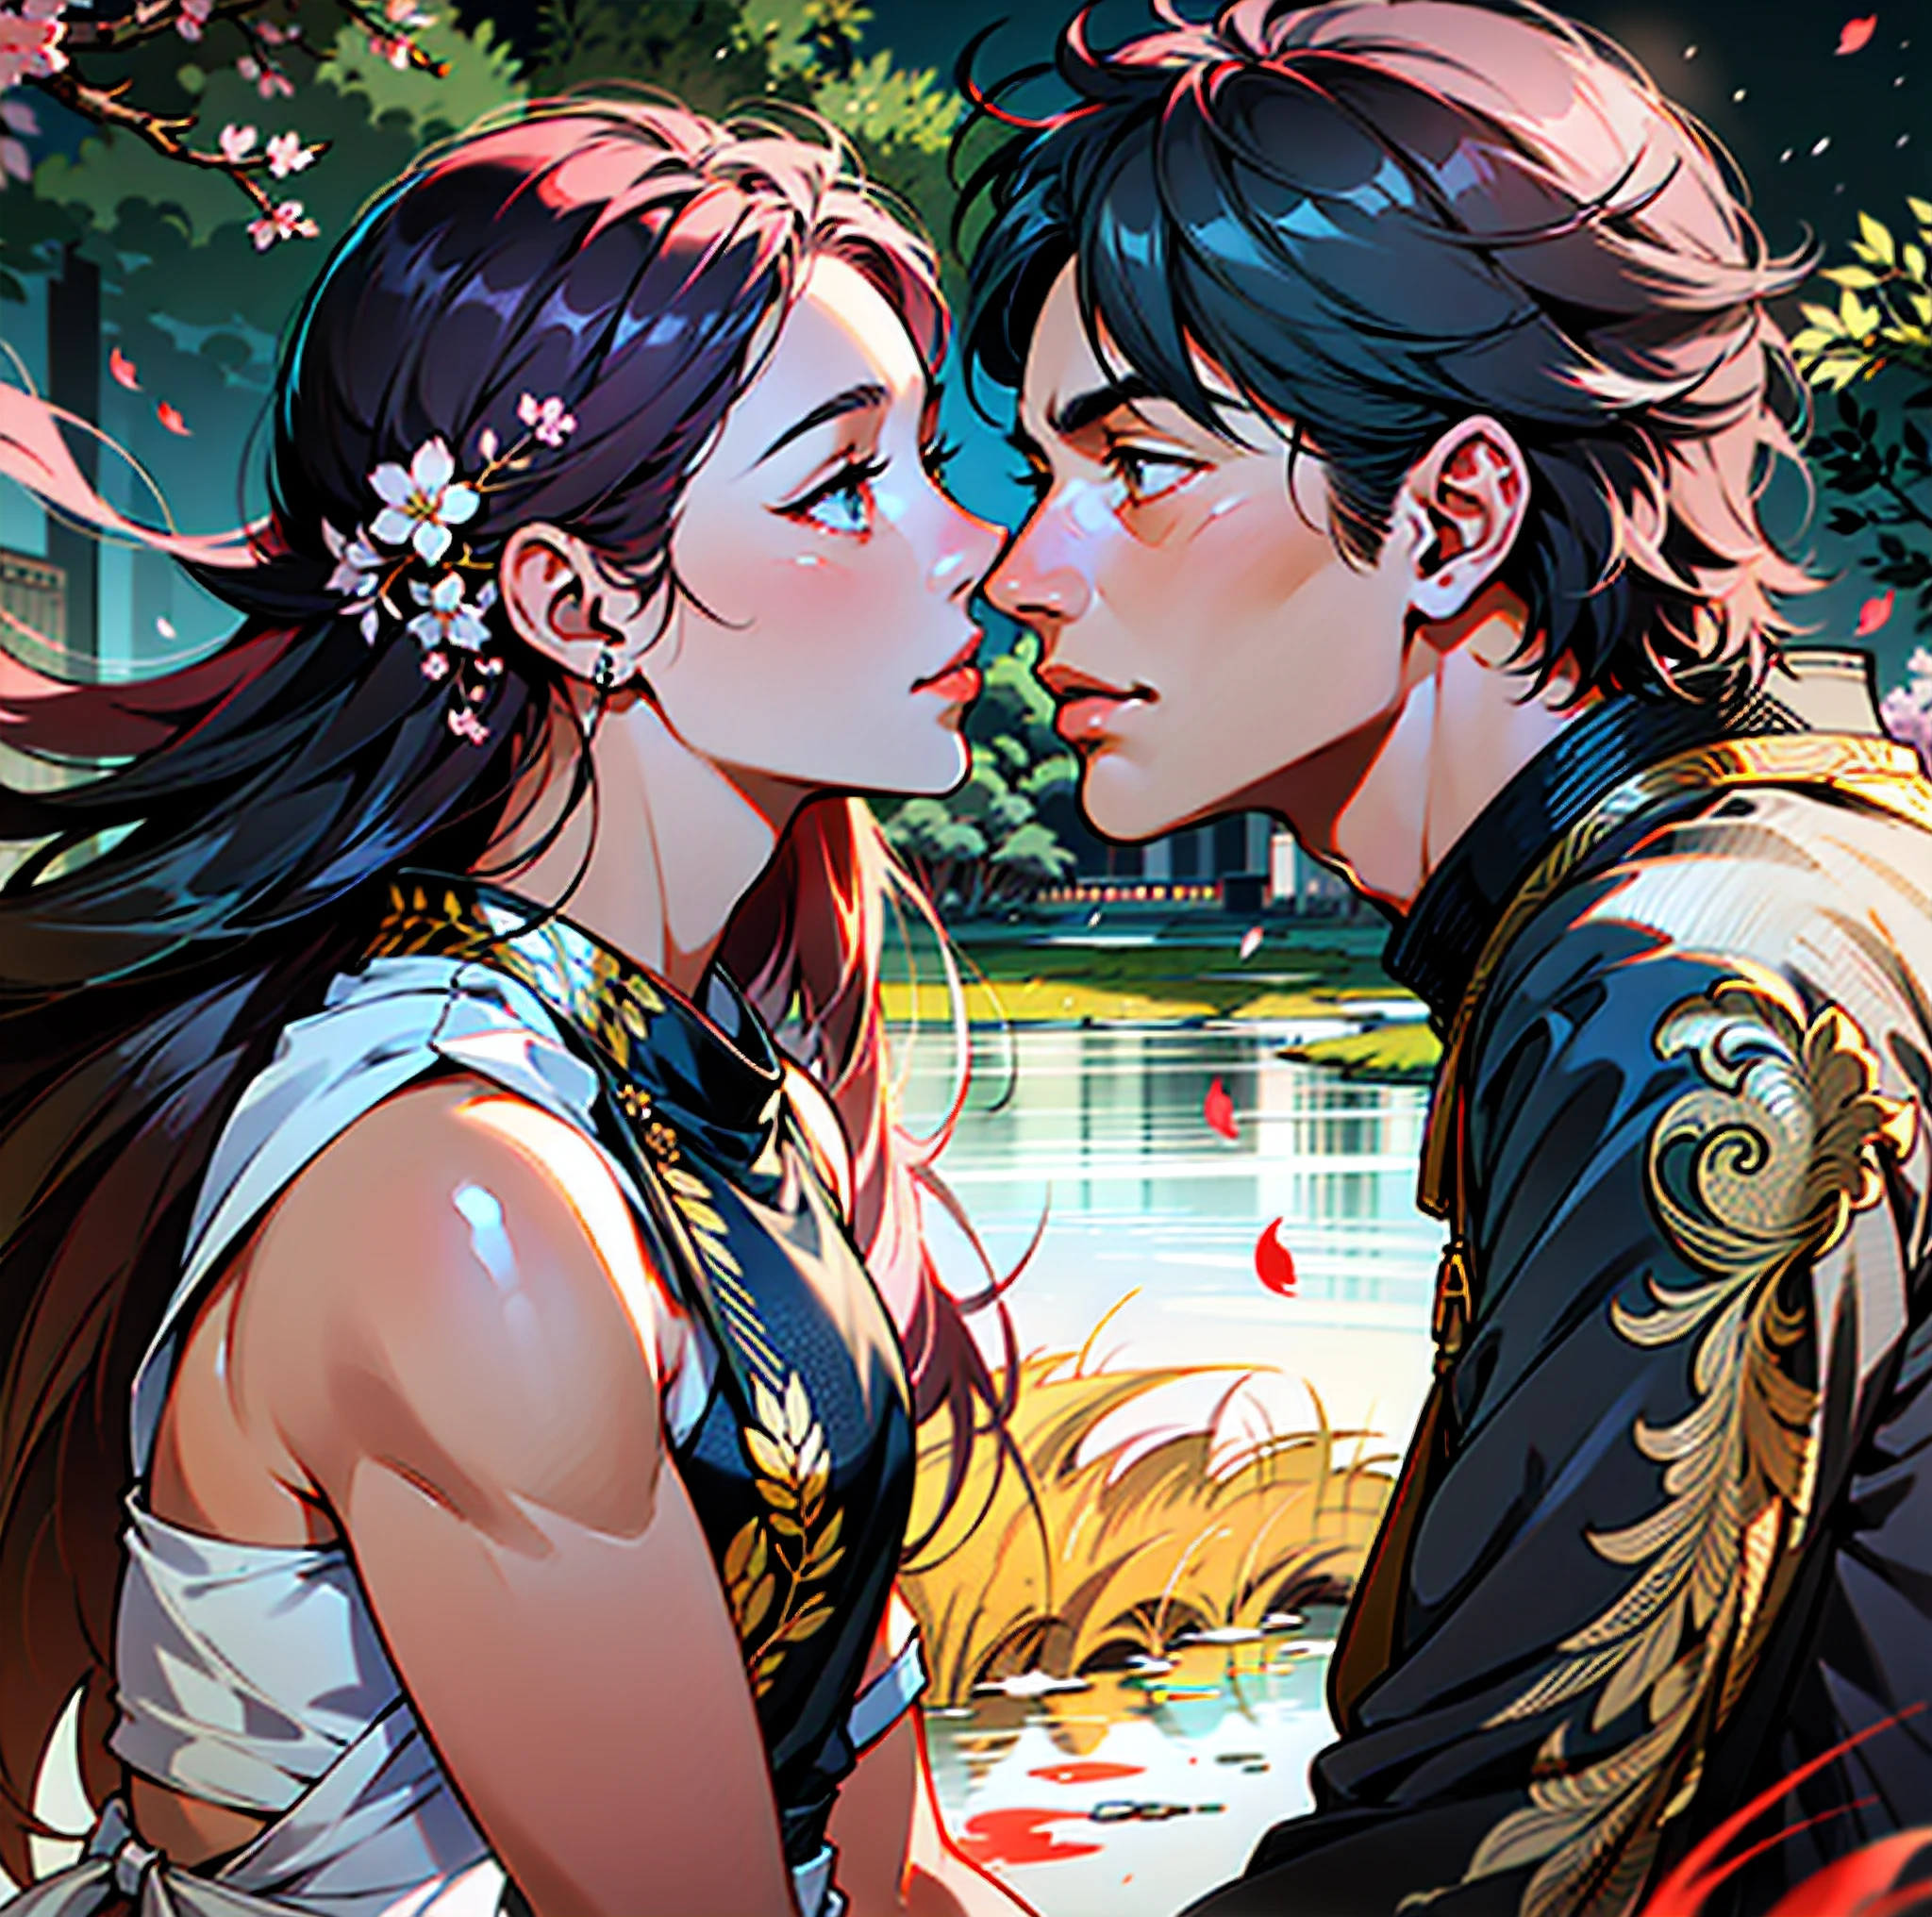 ((1 boy and 1 girl)) ((Best Quality, Masterpiece, Best Contrast, Balanced Lighting, Breathtaking Scenery, Full HD)), sakura leaves floating in the dark lake, bright sky, twilight sky, Indian city on the horizon, a boy and a girl near the lake. Best work of late, advanced sharpening, artwork, cherry trees all around.